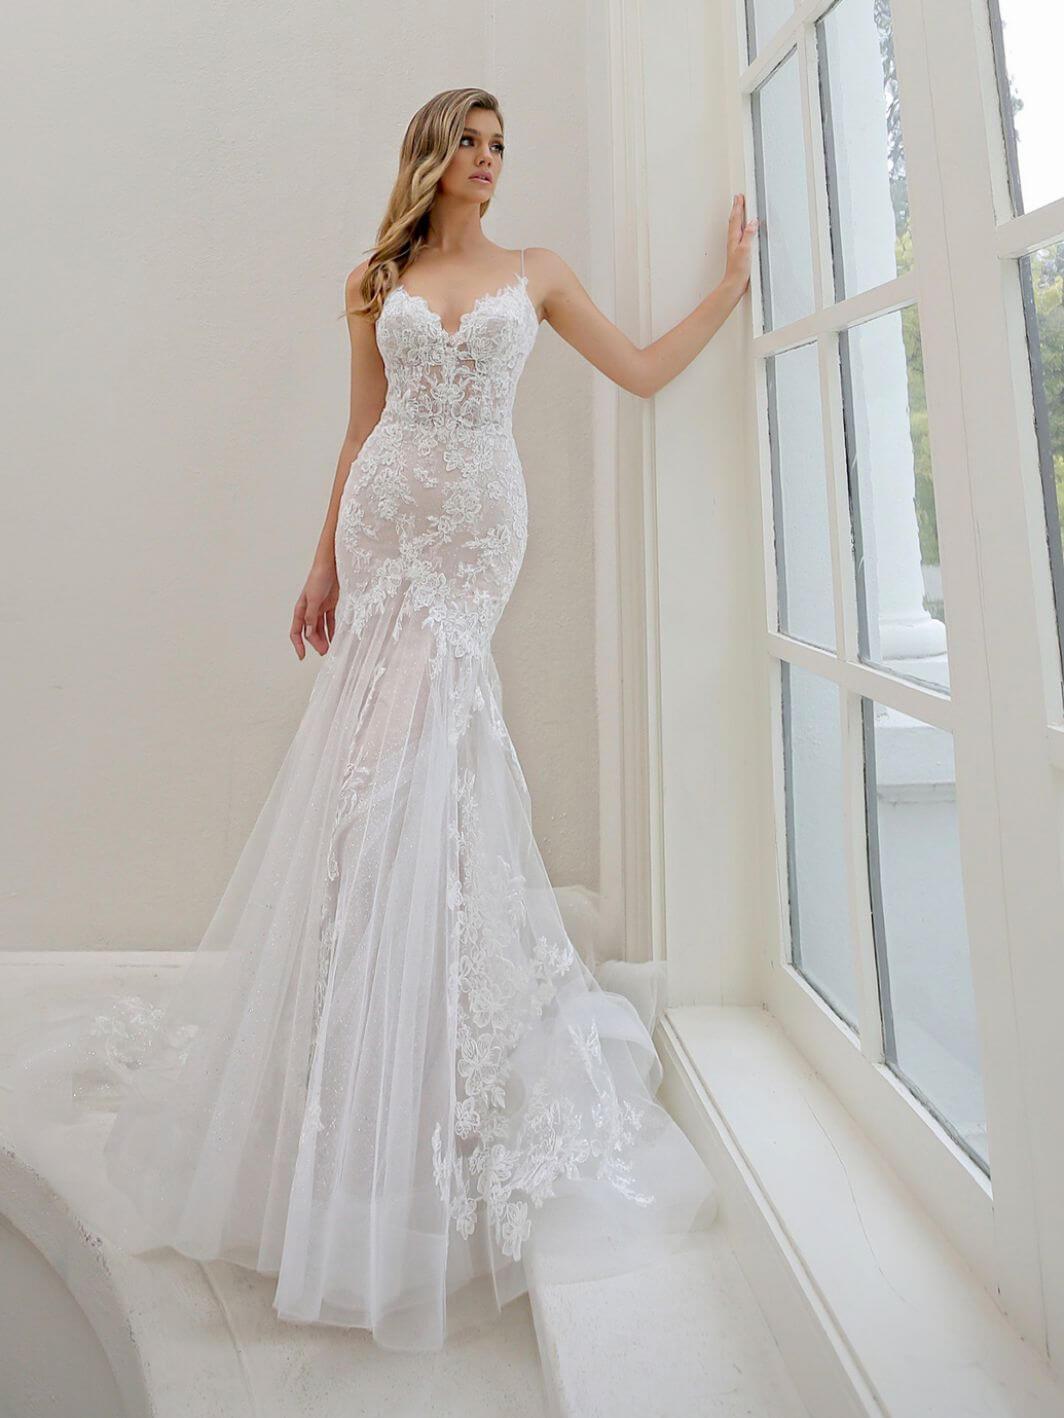 Book a Bridal Appointment at Revelle Bridal - Ottawa Bridal Boutique |  Beautiful bridesmaid dresses, Wedding gowns lace, Wedding dresses lace